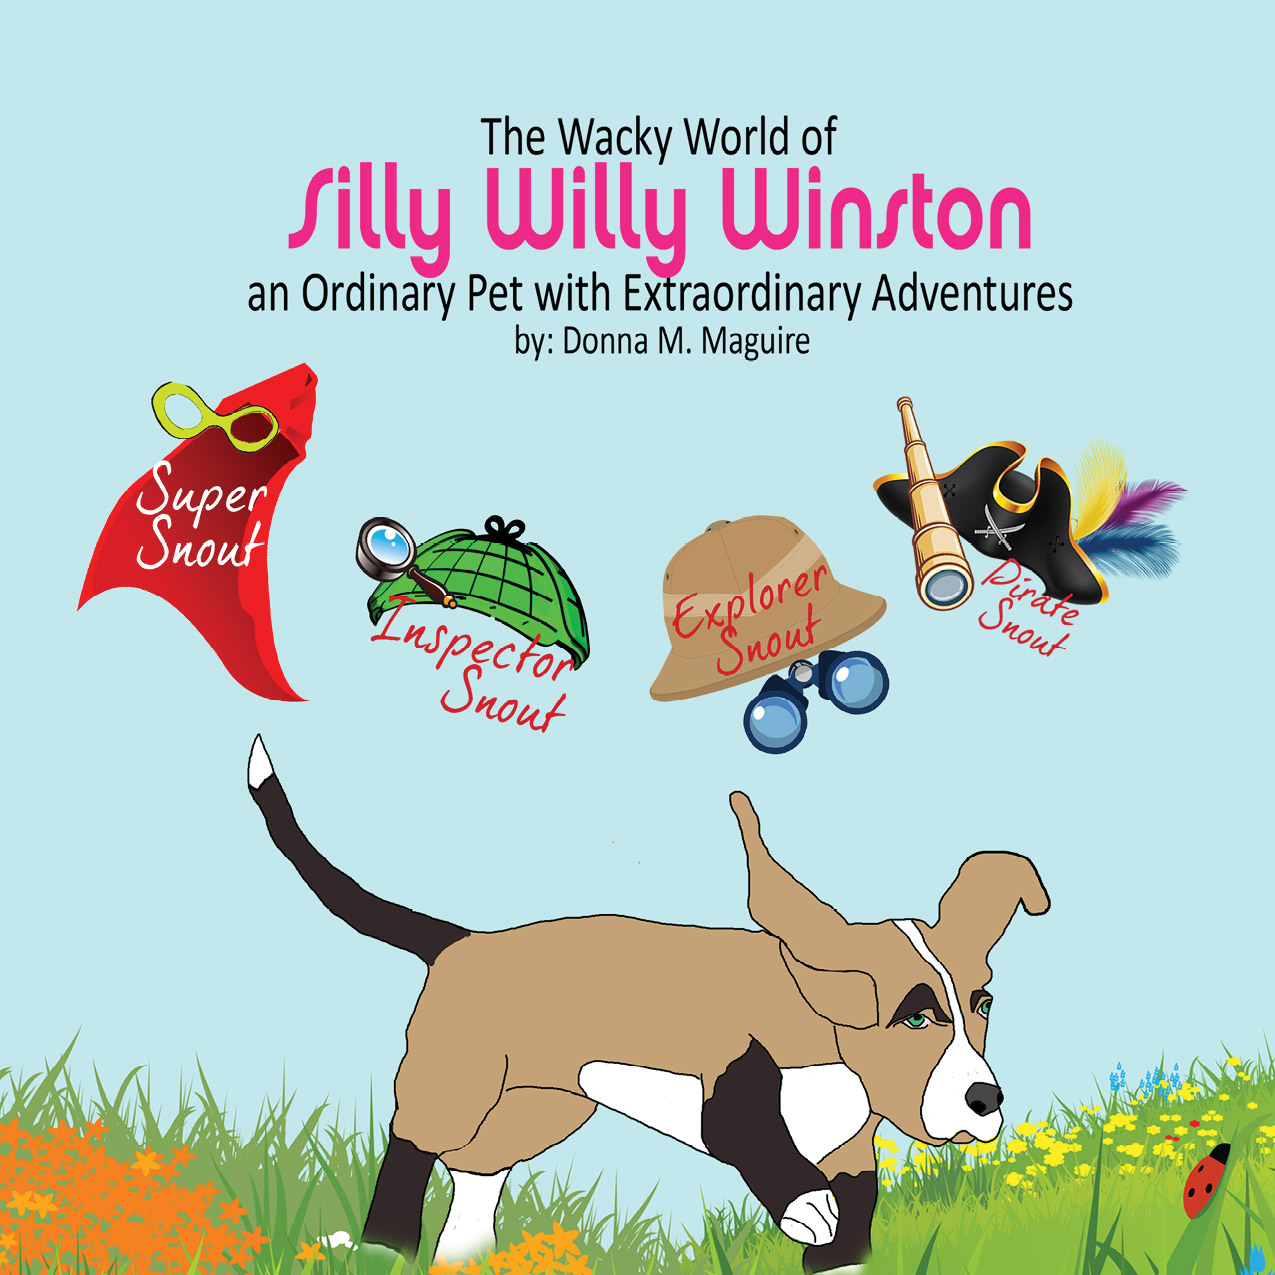 The Wacky World of Silly Willy Winston: An ordinary pet with extraordinary adventures (The Adventures of Silly Willy Winston Book 1)